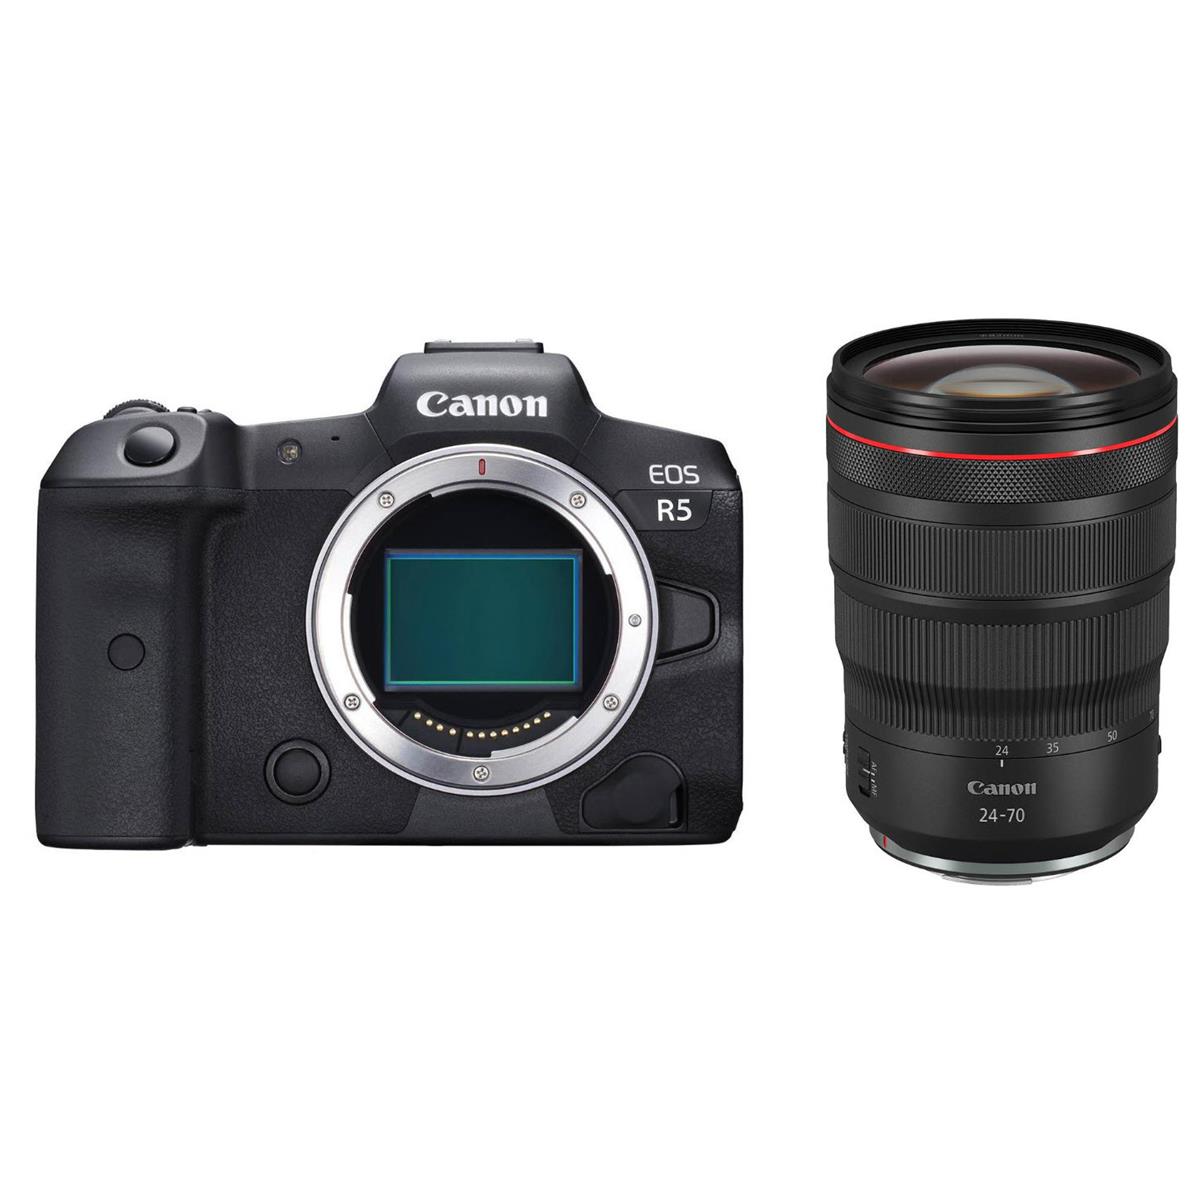 Image of Canon EOS R5 Mirrorless Digital Camera with Canon RF 24-70mm f/2.8 L IS USM Lens